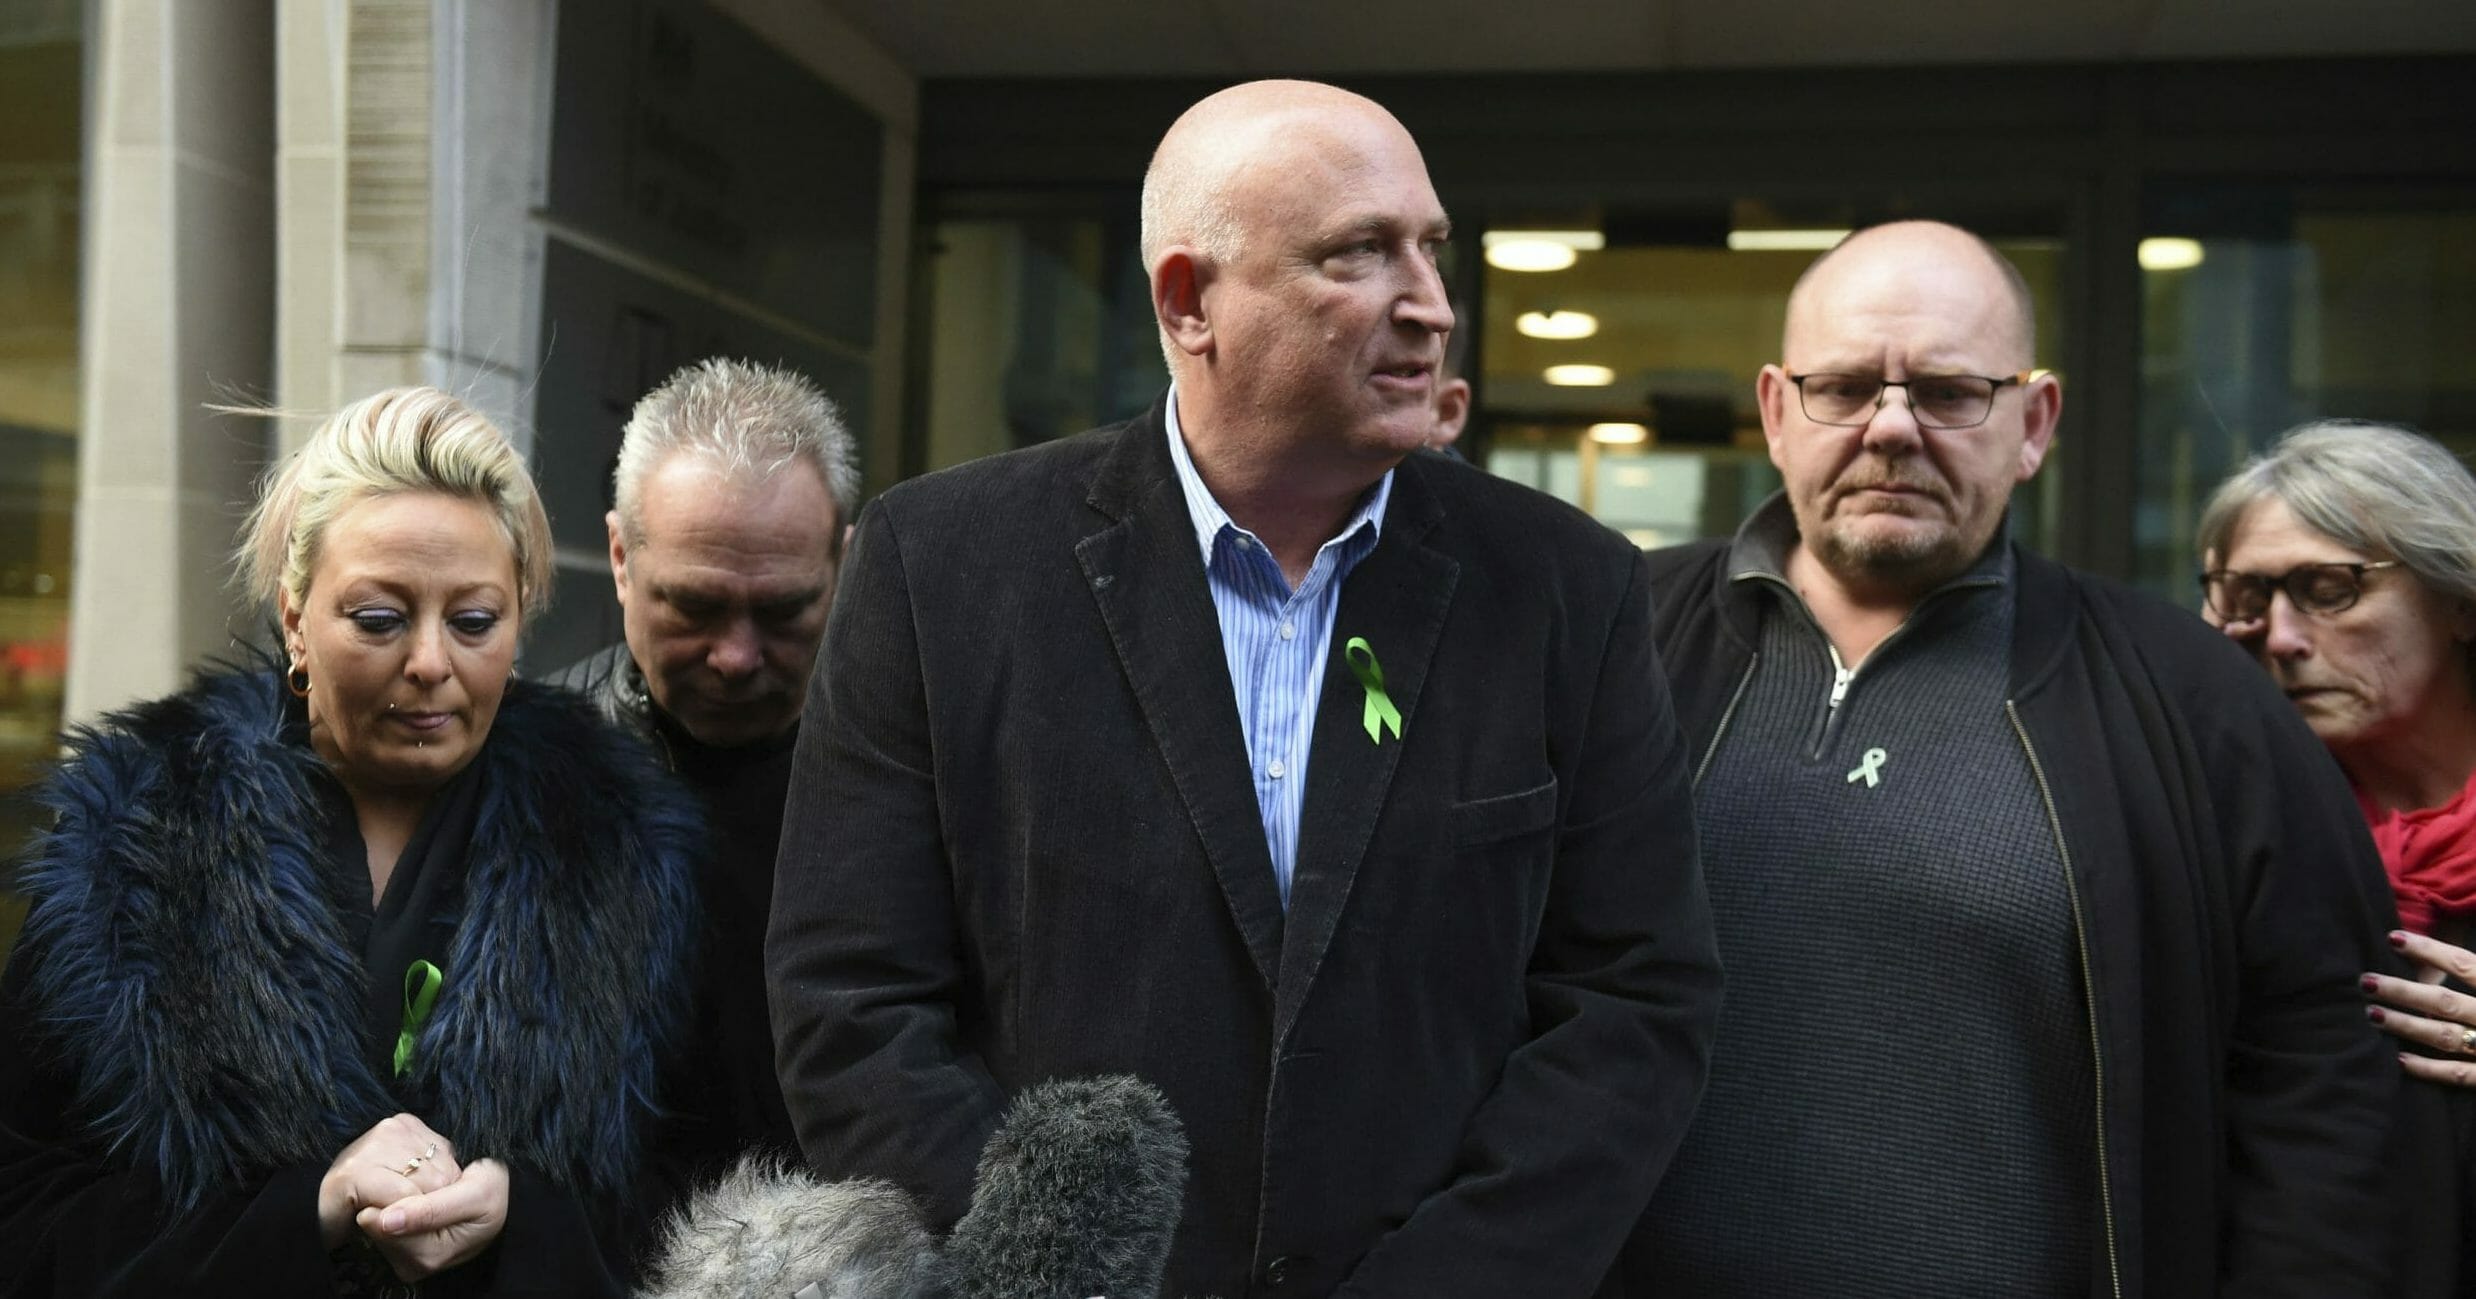 The family of Harry Dunn -- from left, mother Charlotte Charles, stepfather Bruce Charles, family spokesman Radd Seiger, father Tim Dunn and stepmother Tracey Dunn -- speak to the media outside the Ministry of Justice in London on Dec. 20, 2019.